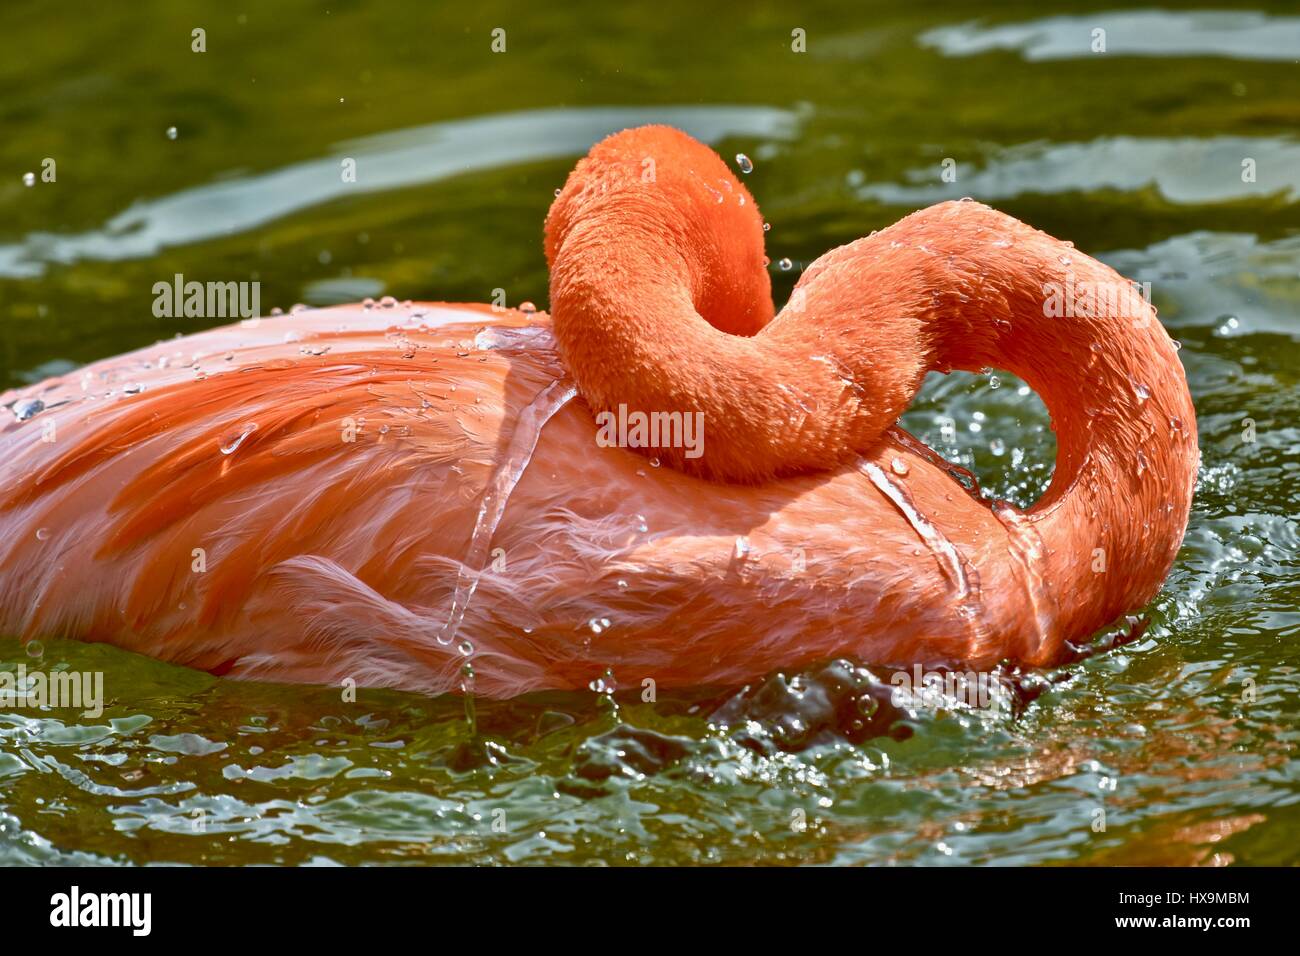 A Caribbean Flamingo (Pheonicopterus ruber ruber) splashing in the water on a warm spring day Stock Photo